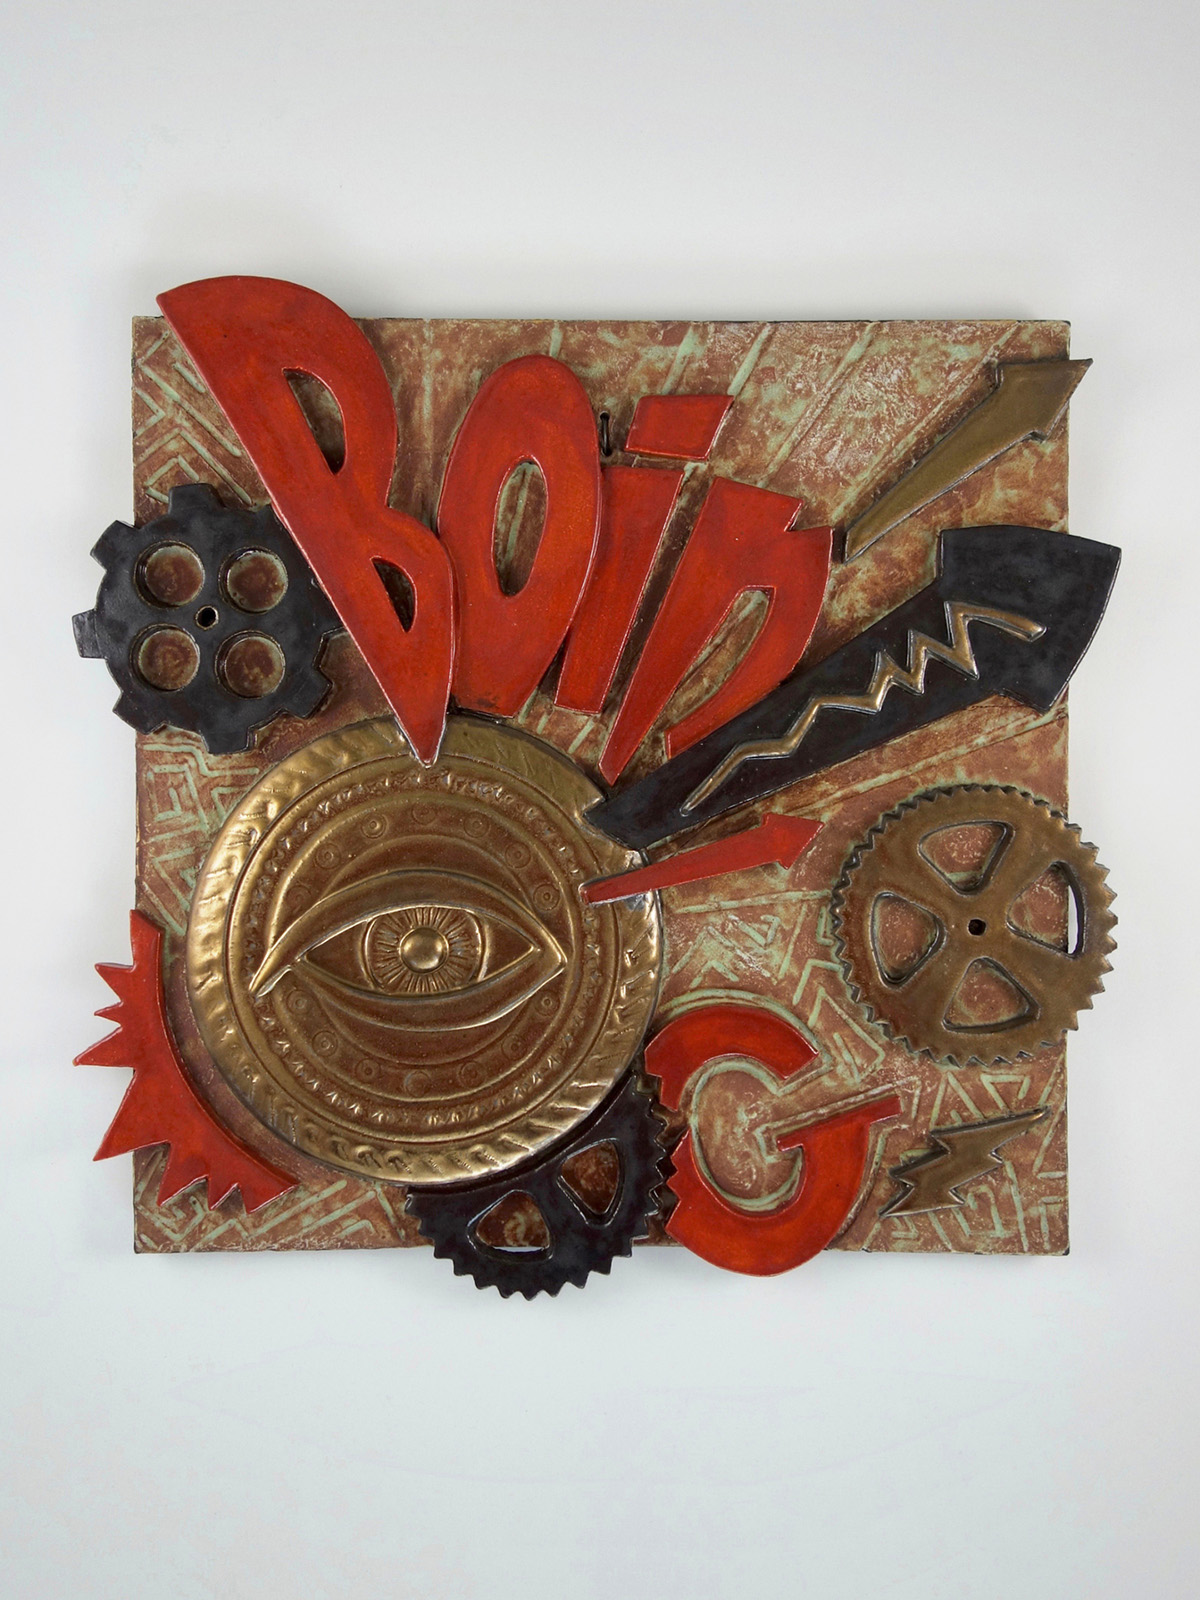  a wall plaque with the word "BOING" in red lettering with metal and black colored cog wheels with arrows pointing off the side of the gold eye under the word.